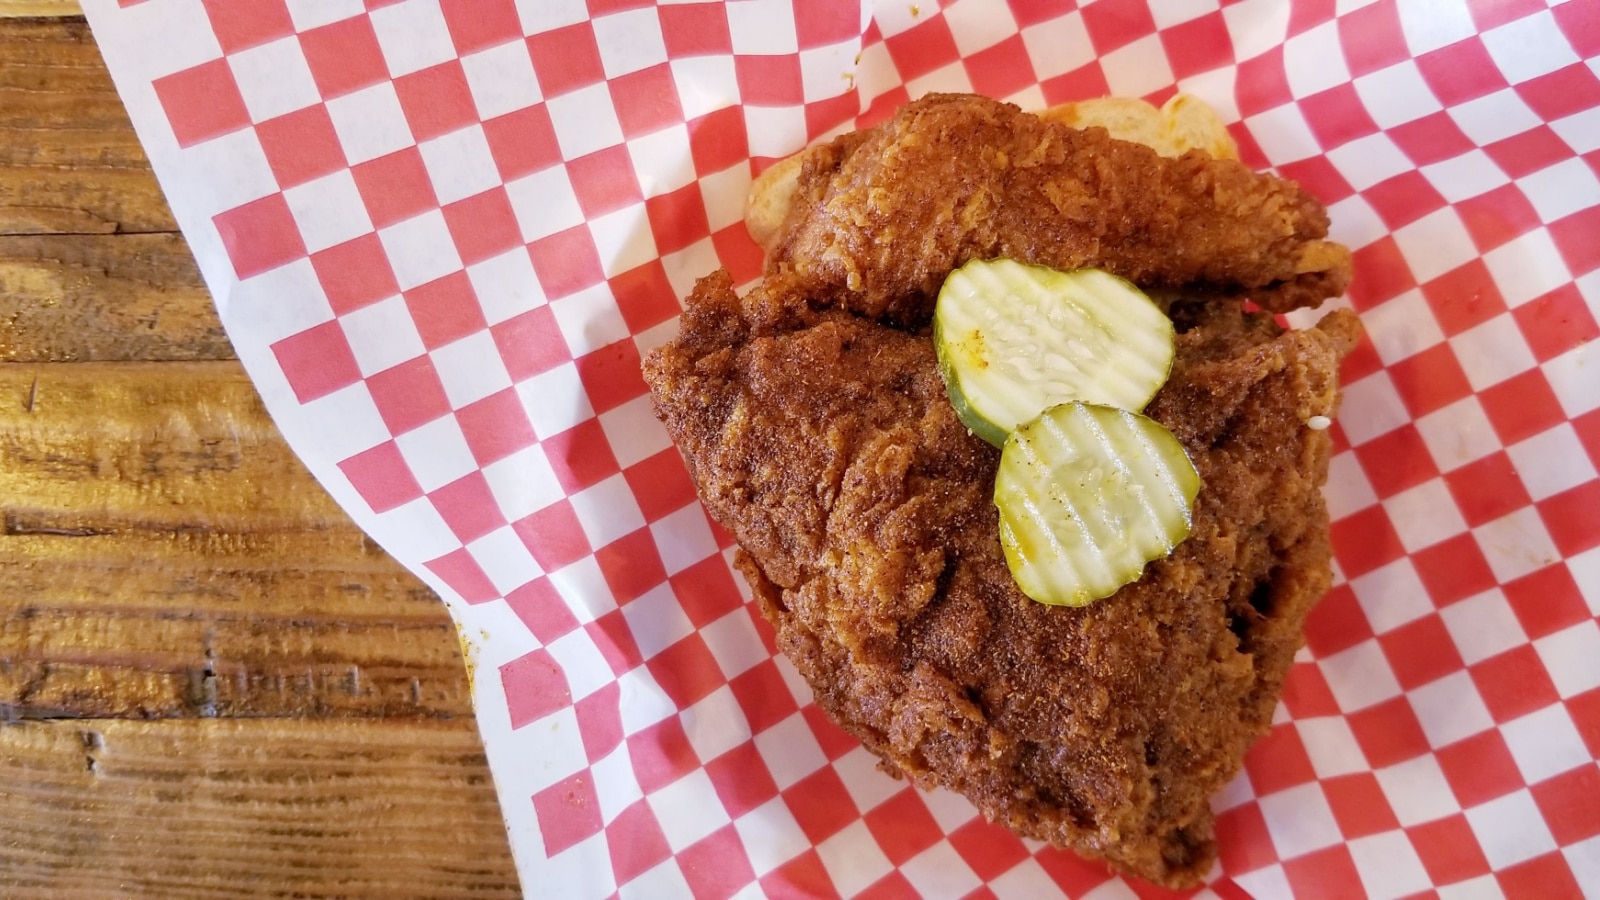 Top View Of Fried Chicken with Wooden Table Top Surface. Famous Nashville Hot Chicken with Pickled Cucumber. Crispy Fried Chicken Breast with Skin On.